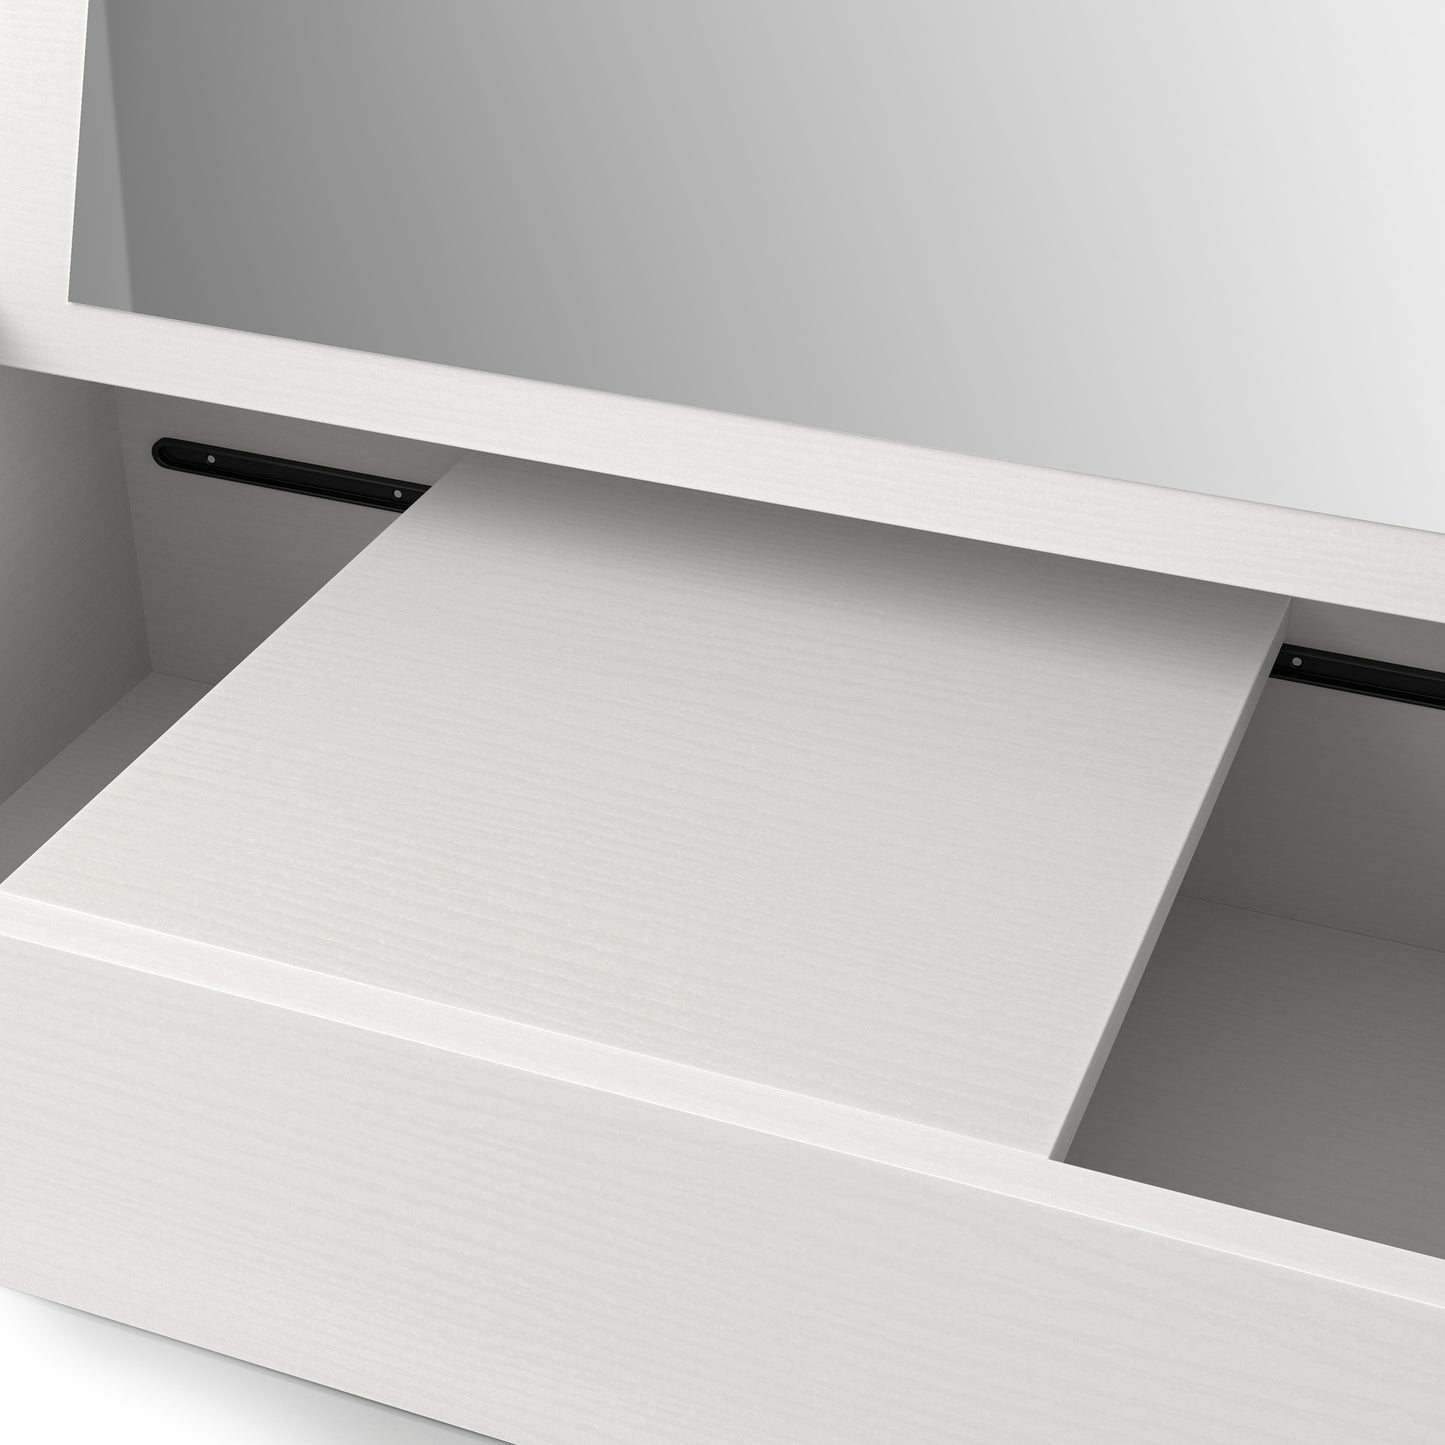 Left angled close-up center view of a contemporary white flip-top wall mounted makeup vanity with hidden storage and top up to show mirror on a white background